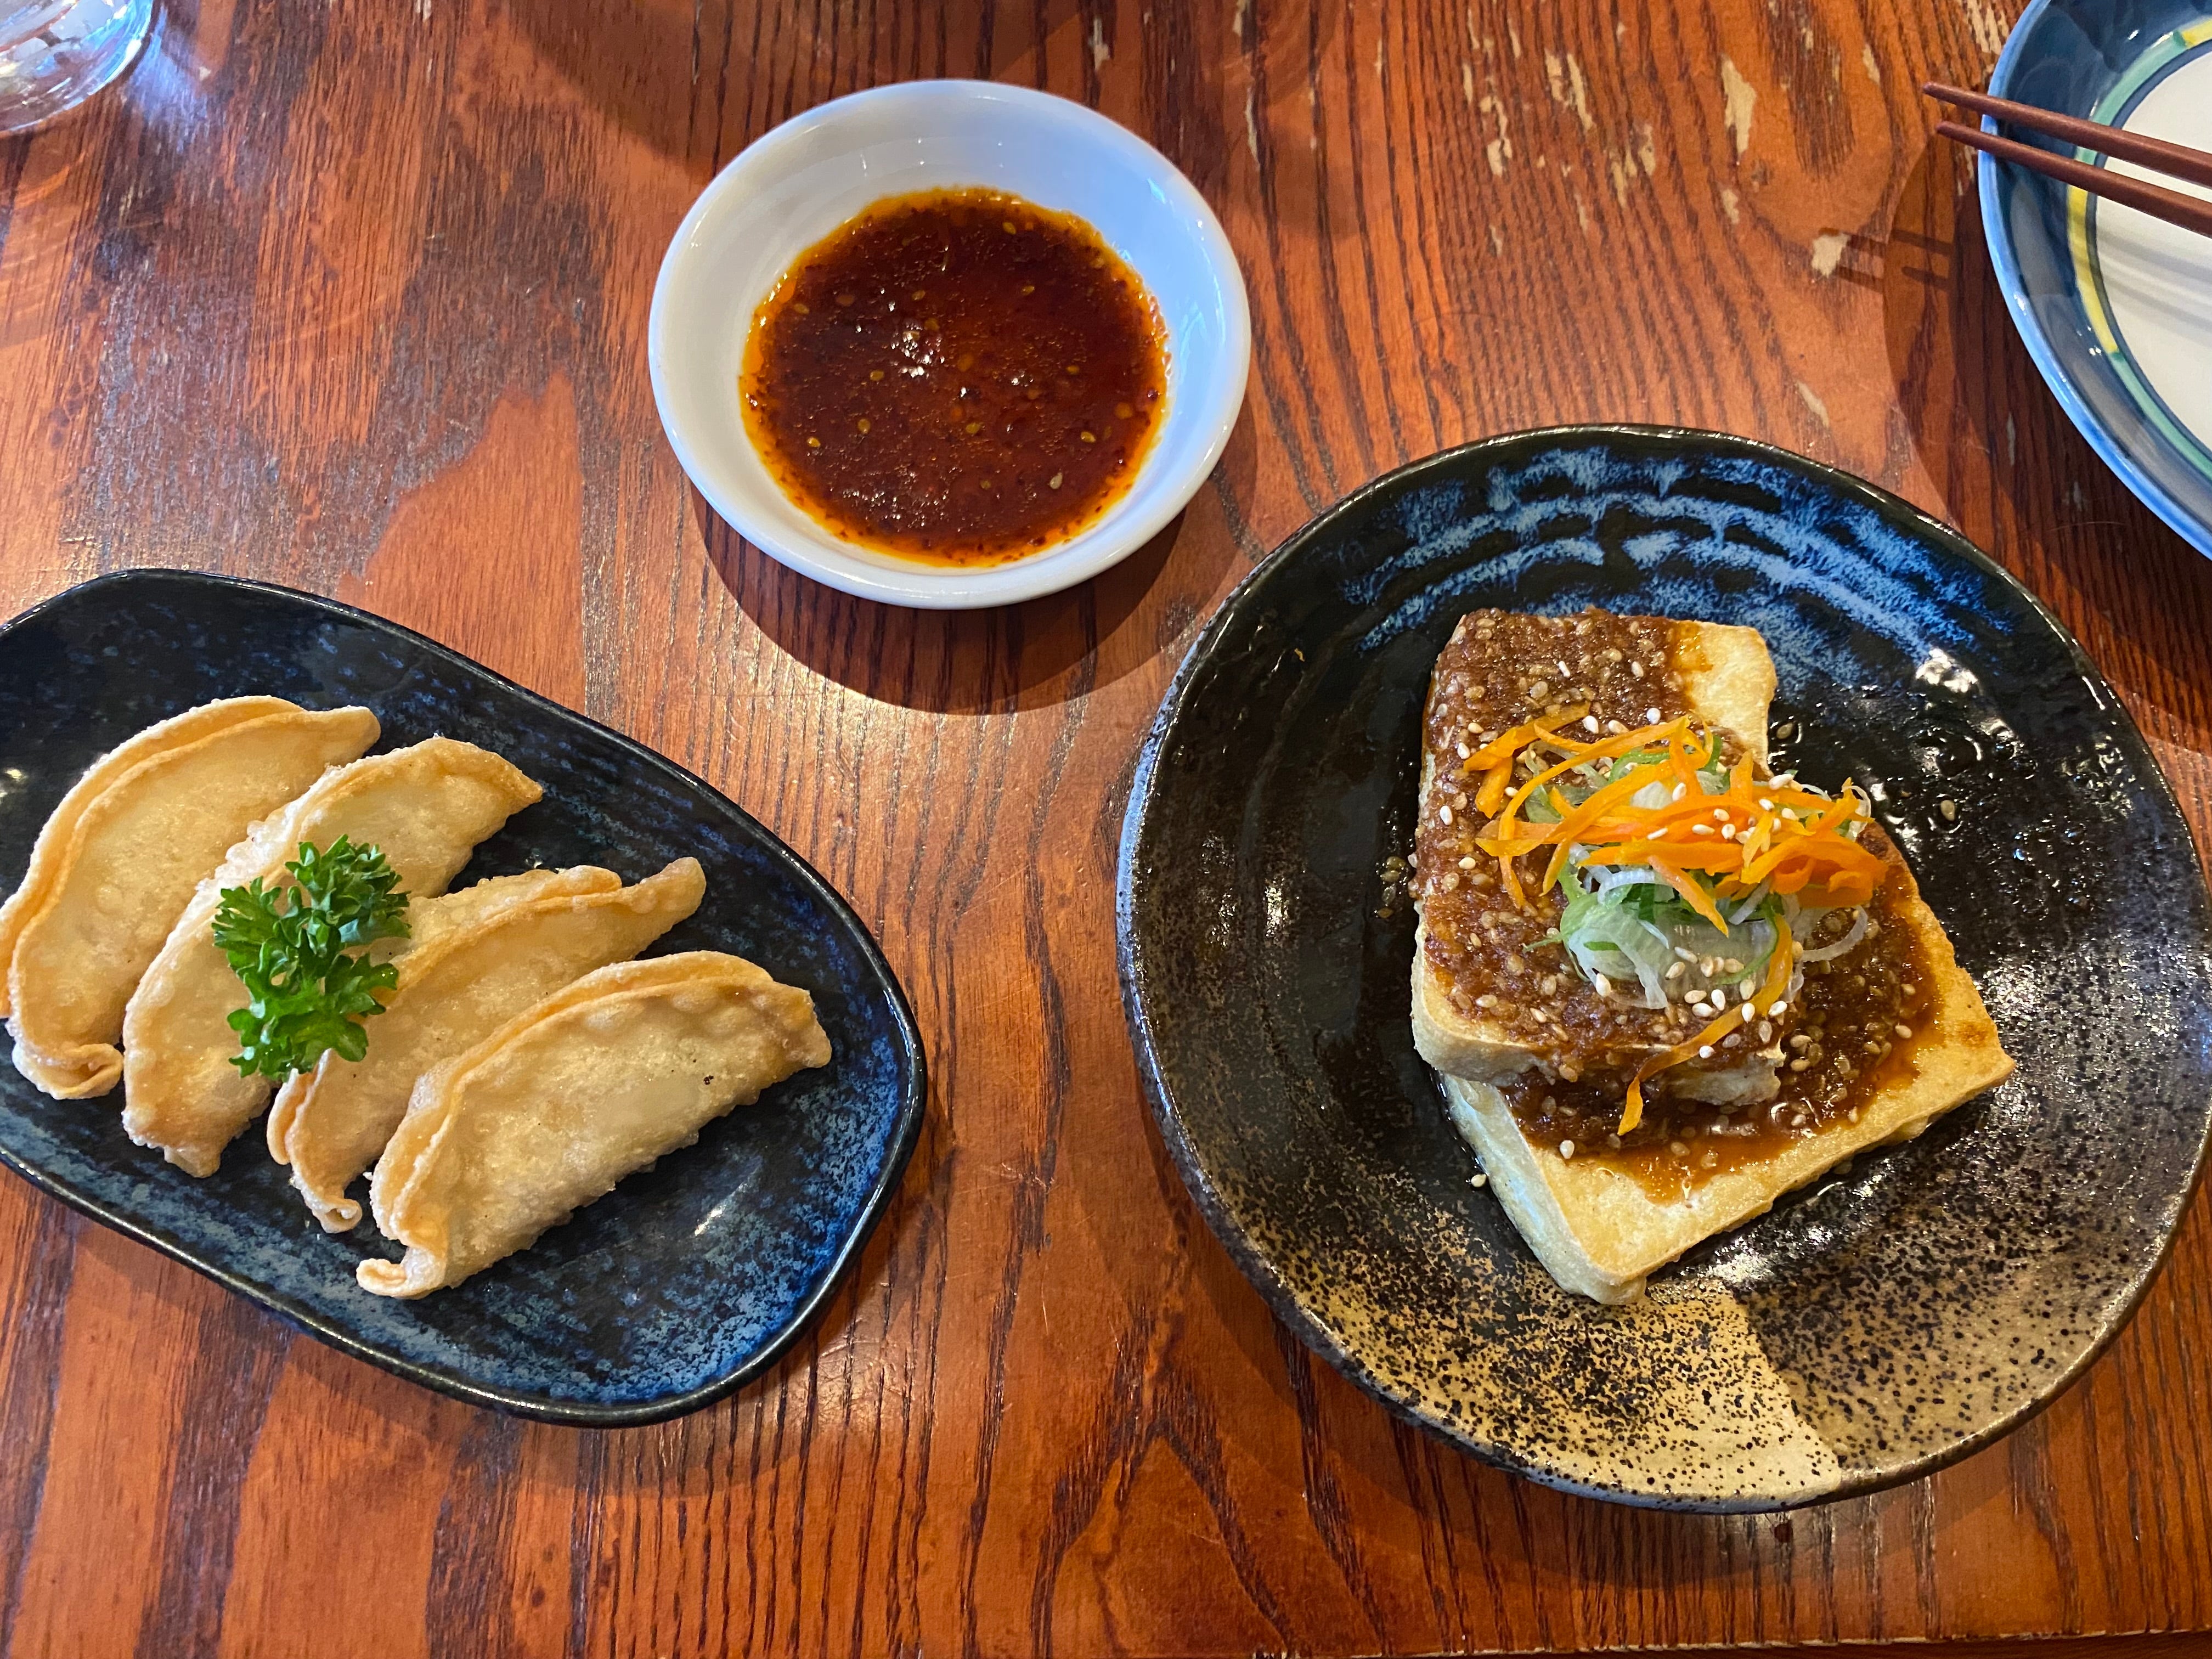 If the gyozas and tofu at Itadakizen are anything to go by, the rest of the menu is probably excellent